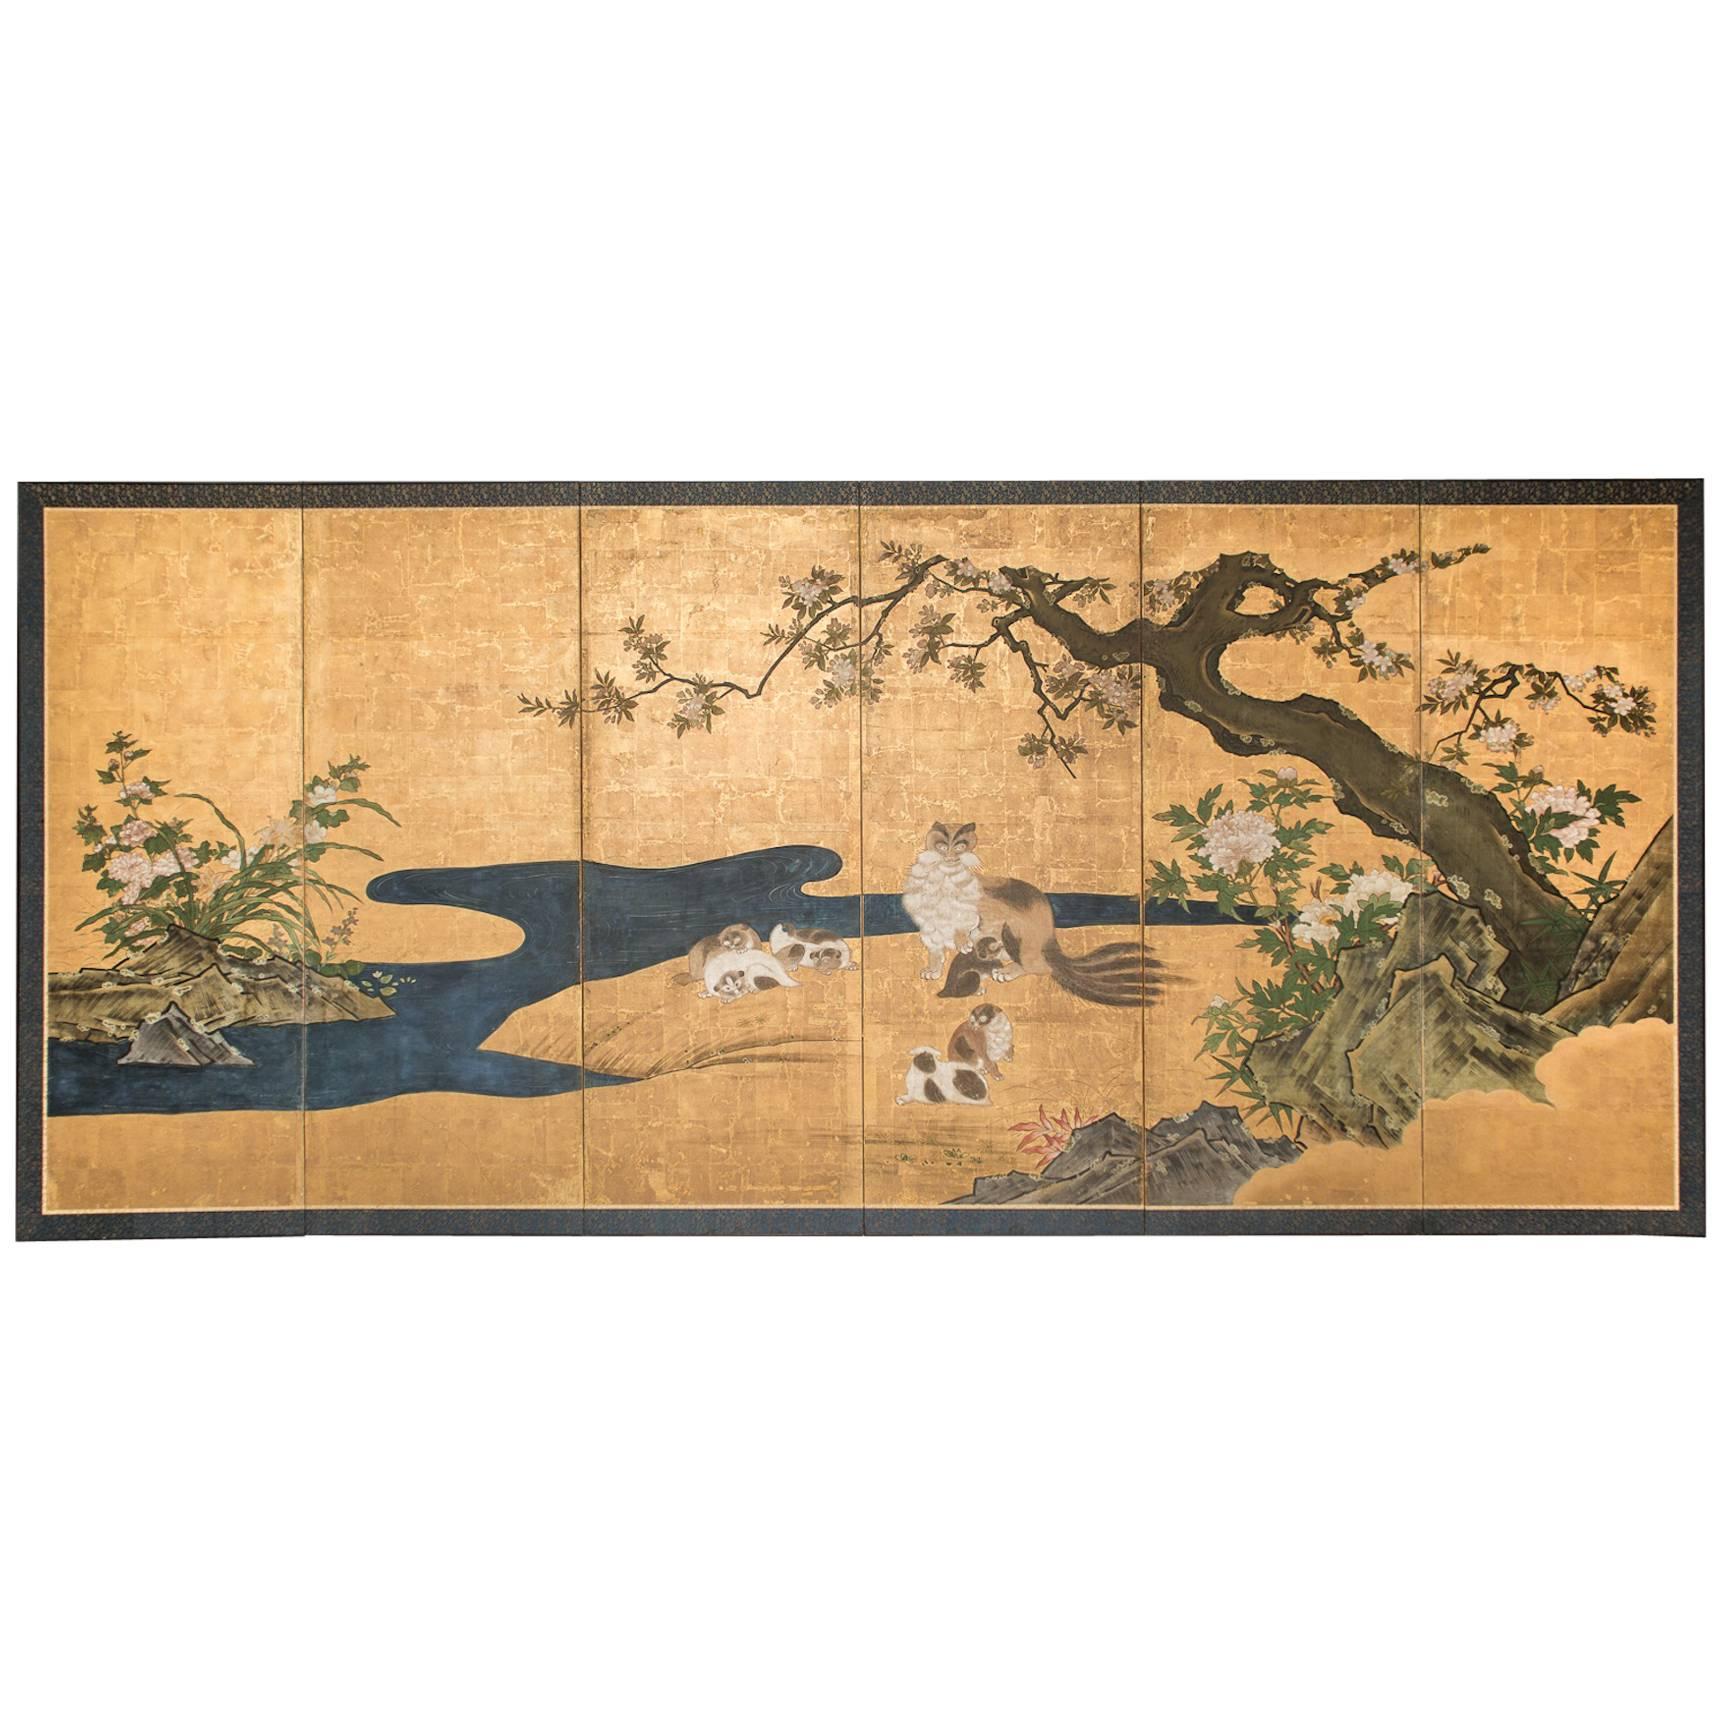 Japanese Six-Panel Screen "Mother and Her Kittens" For Sale